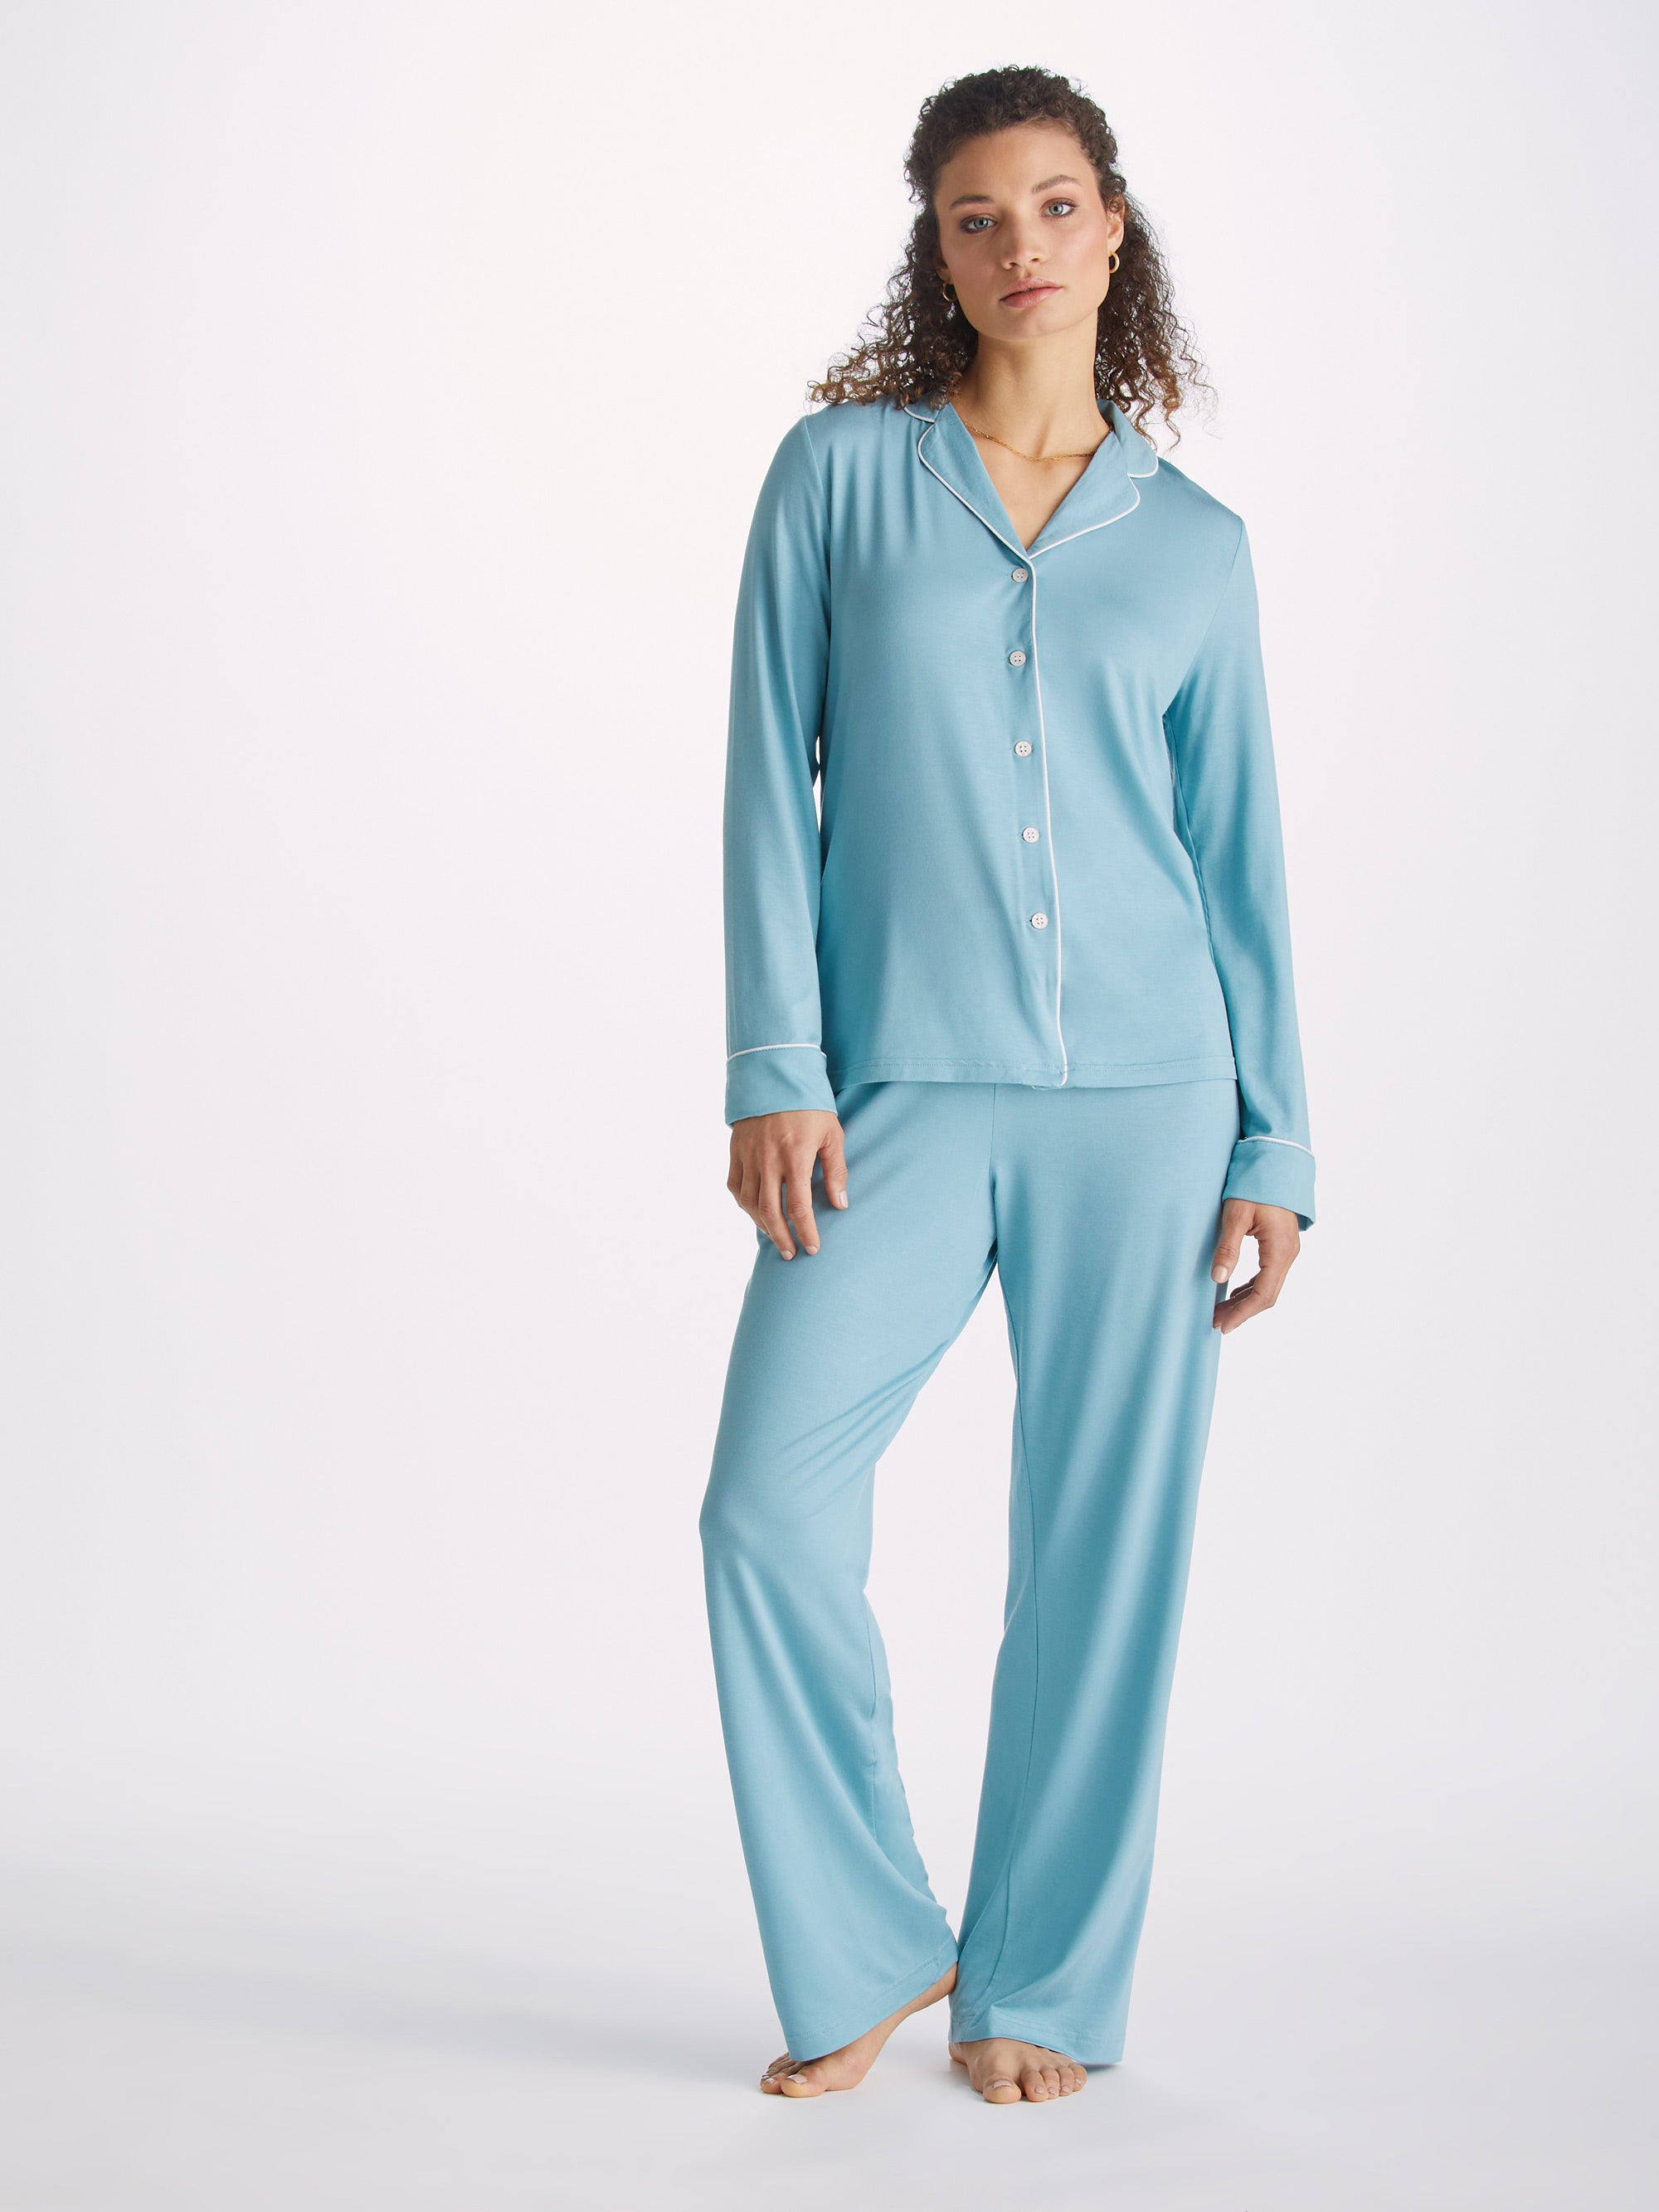 Buy Women's Micro Modal Cotton Relaxed Fit Printed Pyjama with Lace Trim on  Pockets - Iris Blue RX09